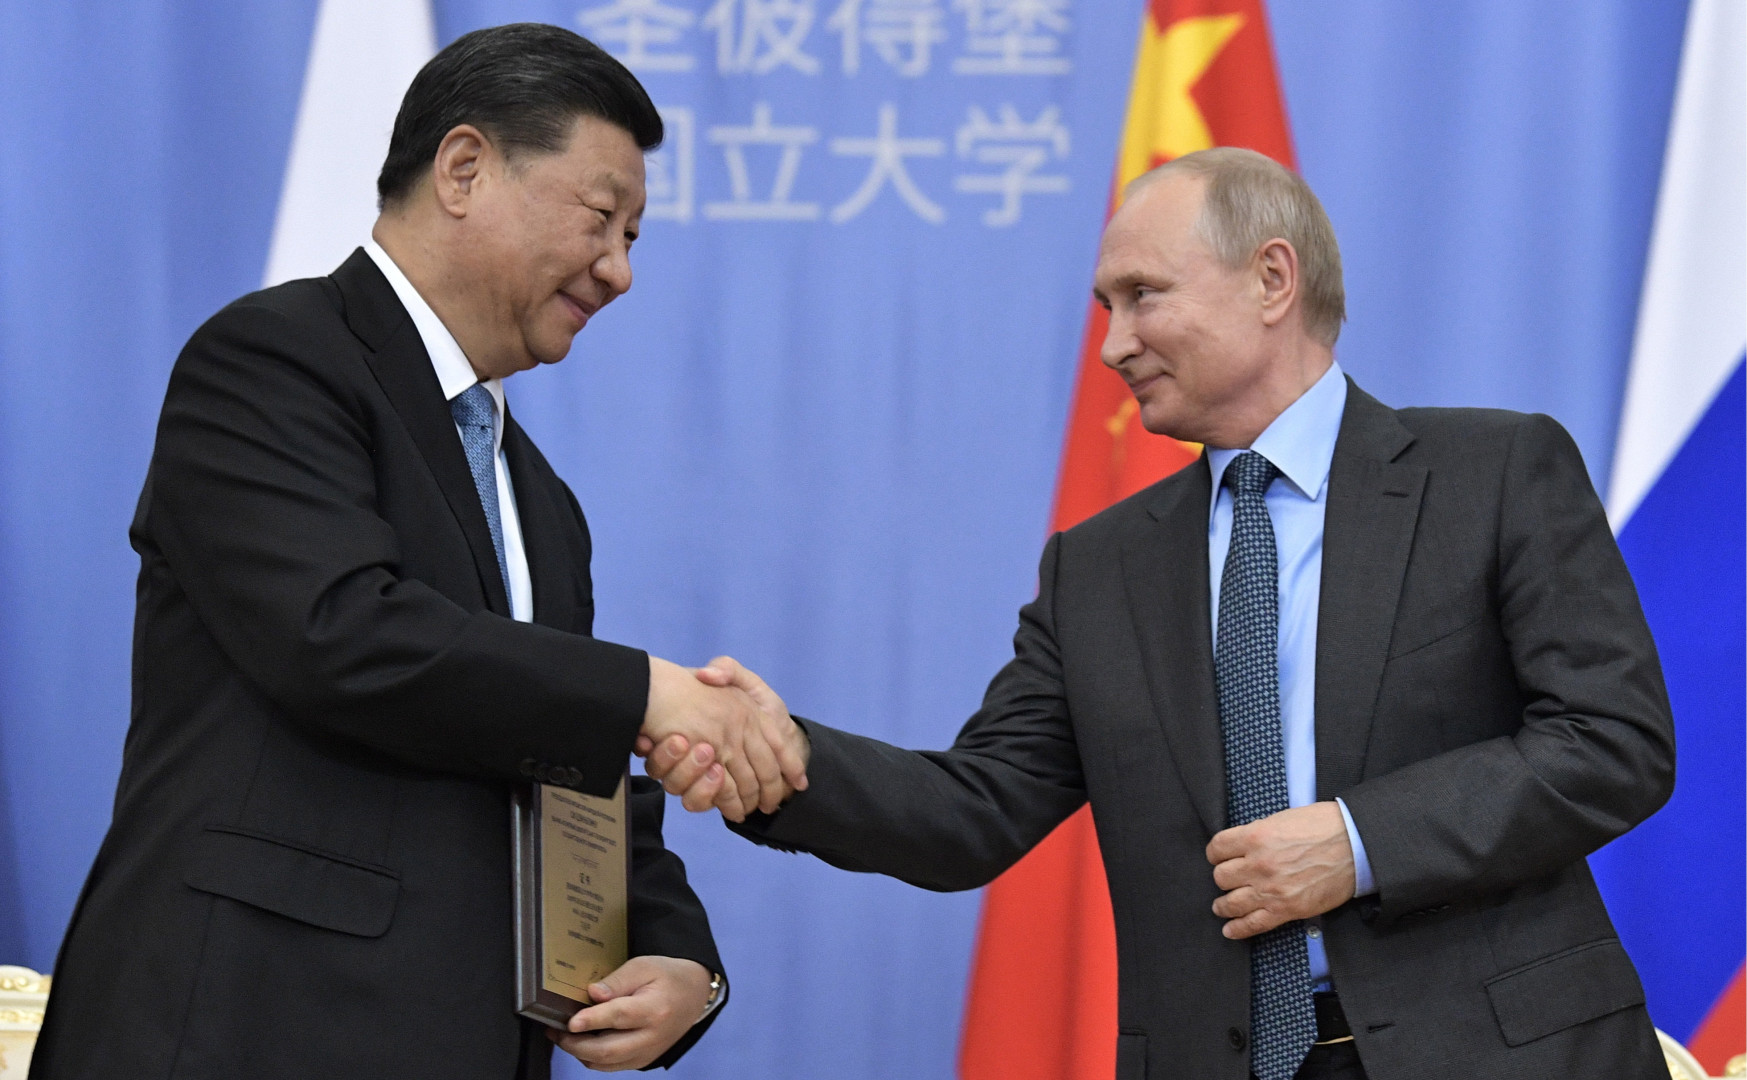 For Russia-China, multipolarity is all about (usurping) the Benjamins